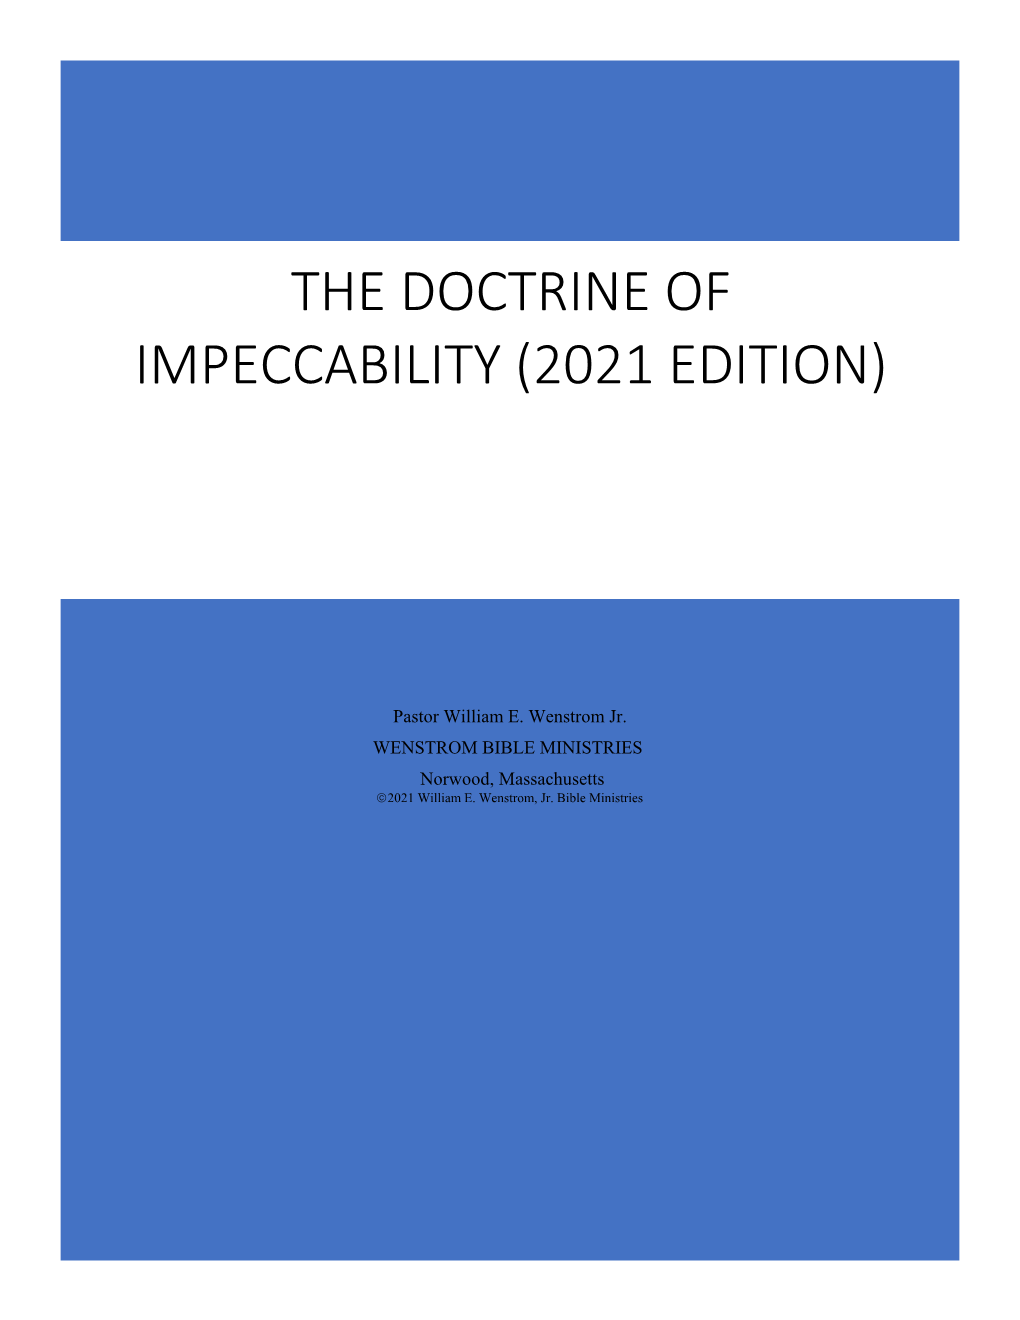 The Doctrine of Impeccability (2021 Edition)